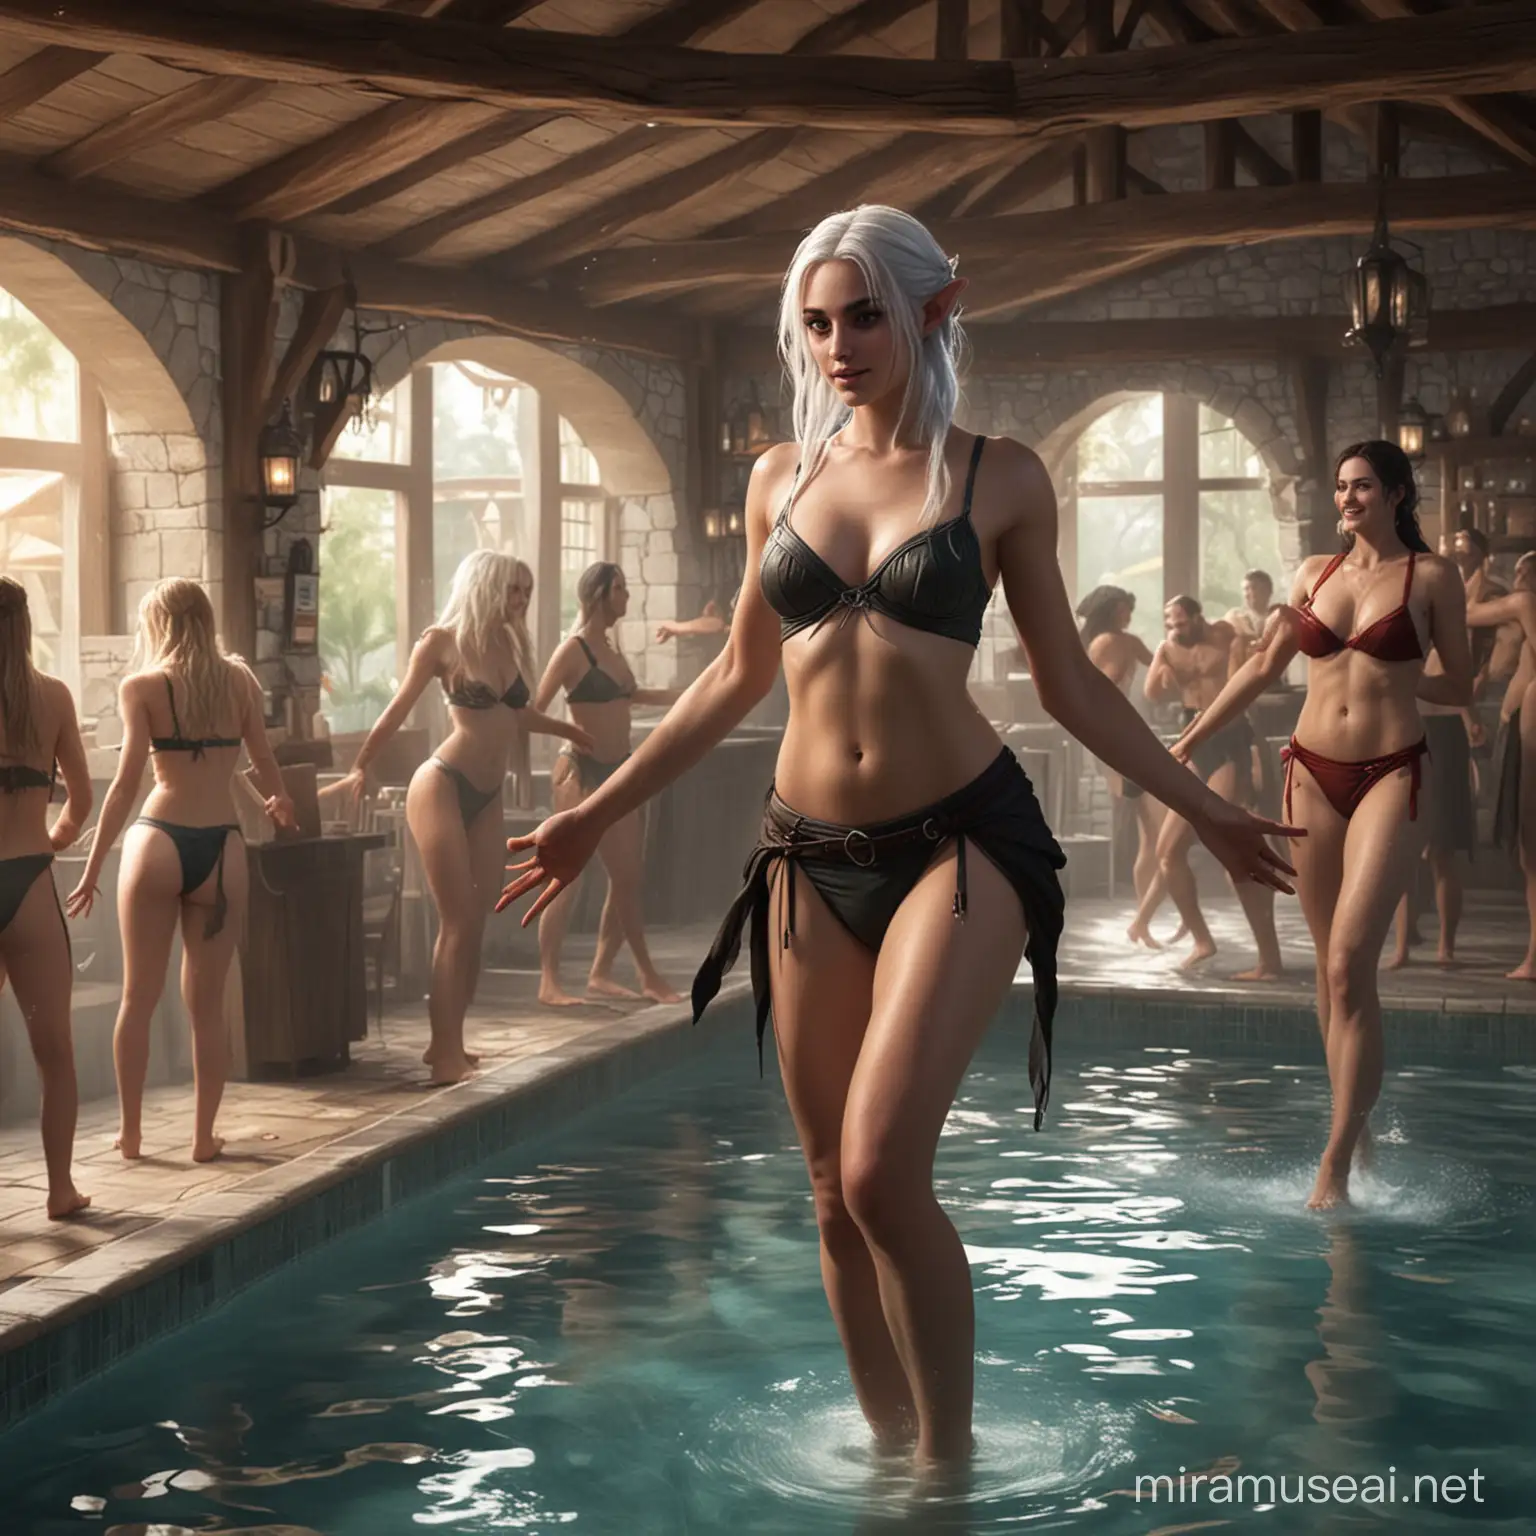 half-naked females a Drow, a Half-elf, a human dancing around a pool in a tavern spa.